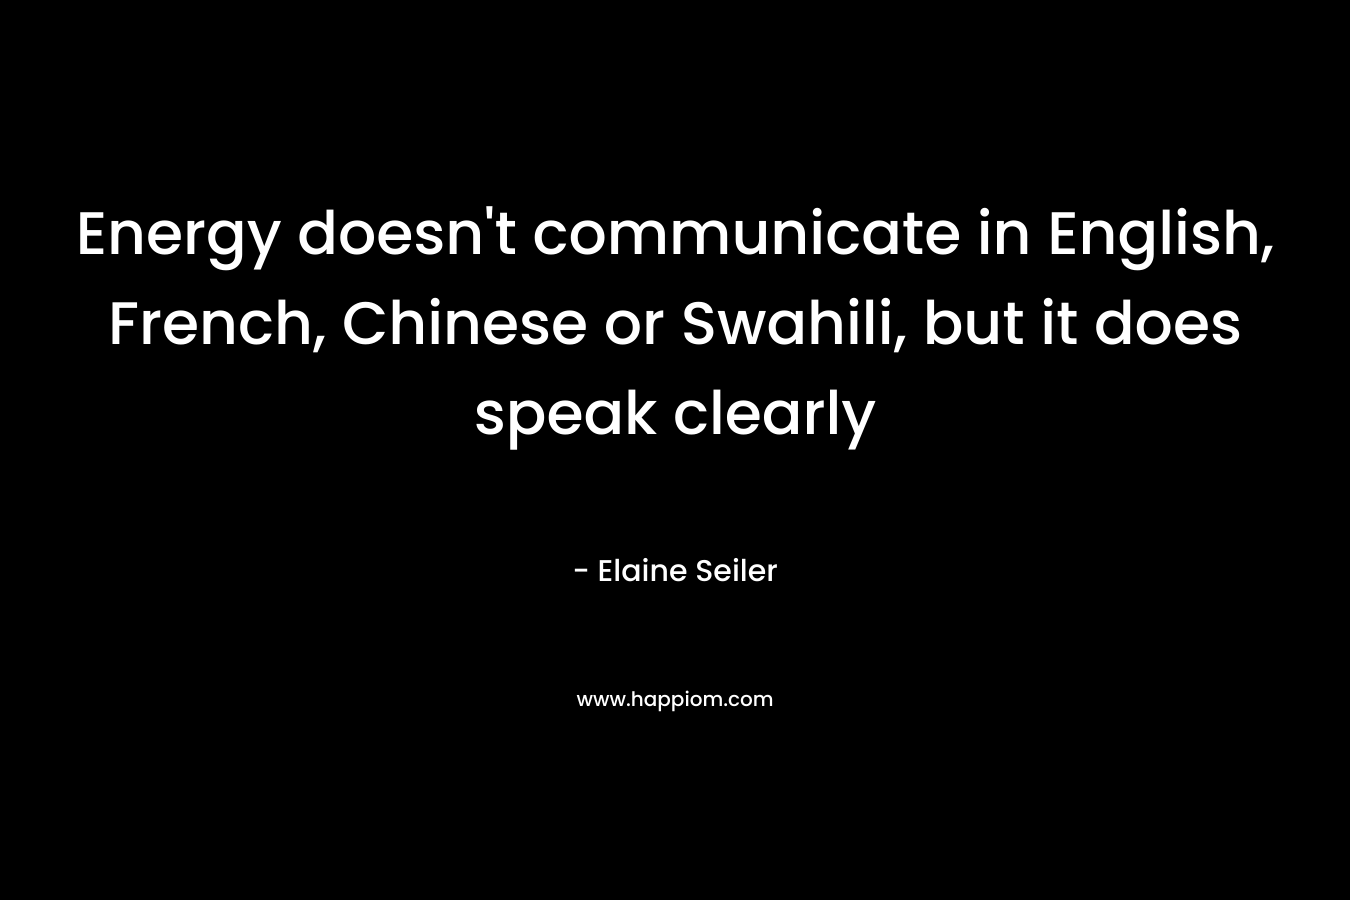 Energy doesn’t communicate in English, French, Chinese or Swahili, but it does speak clearly – Elaine Seiler